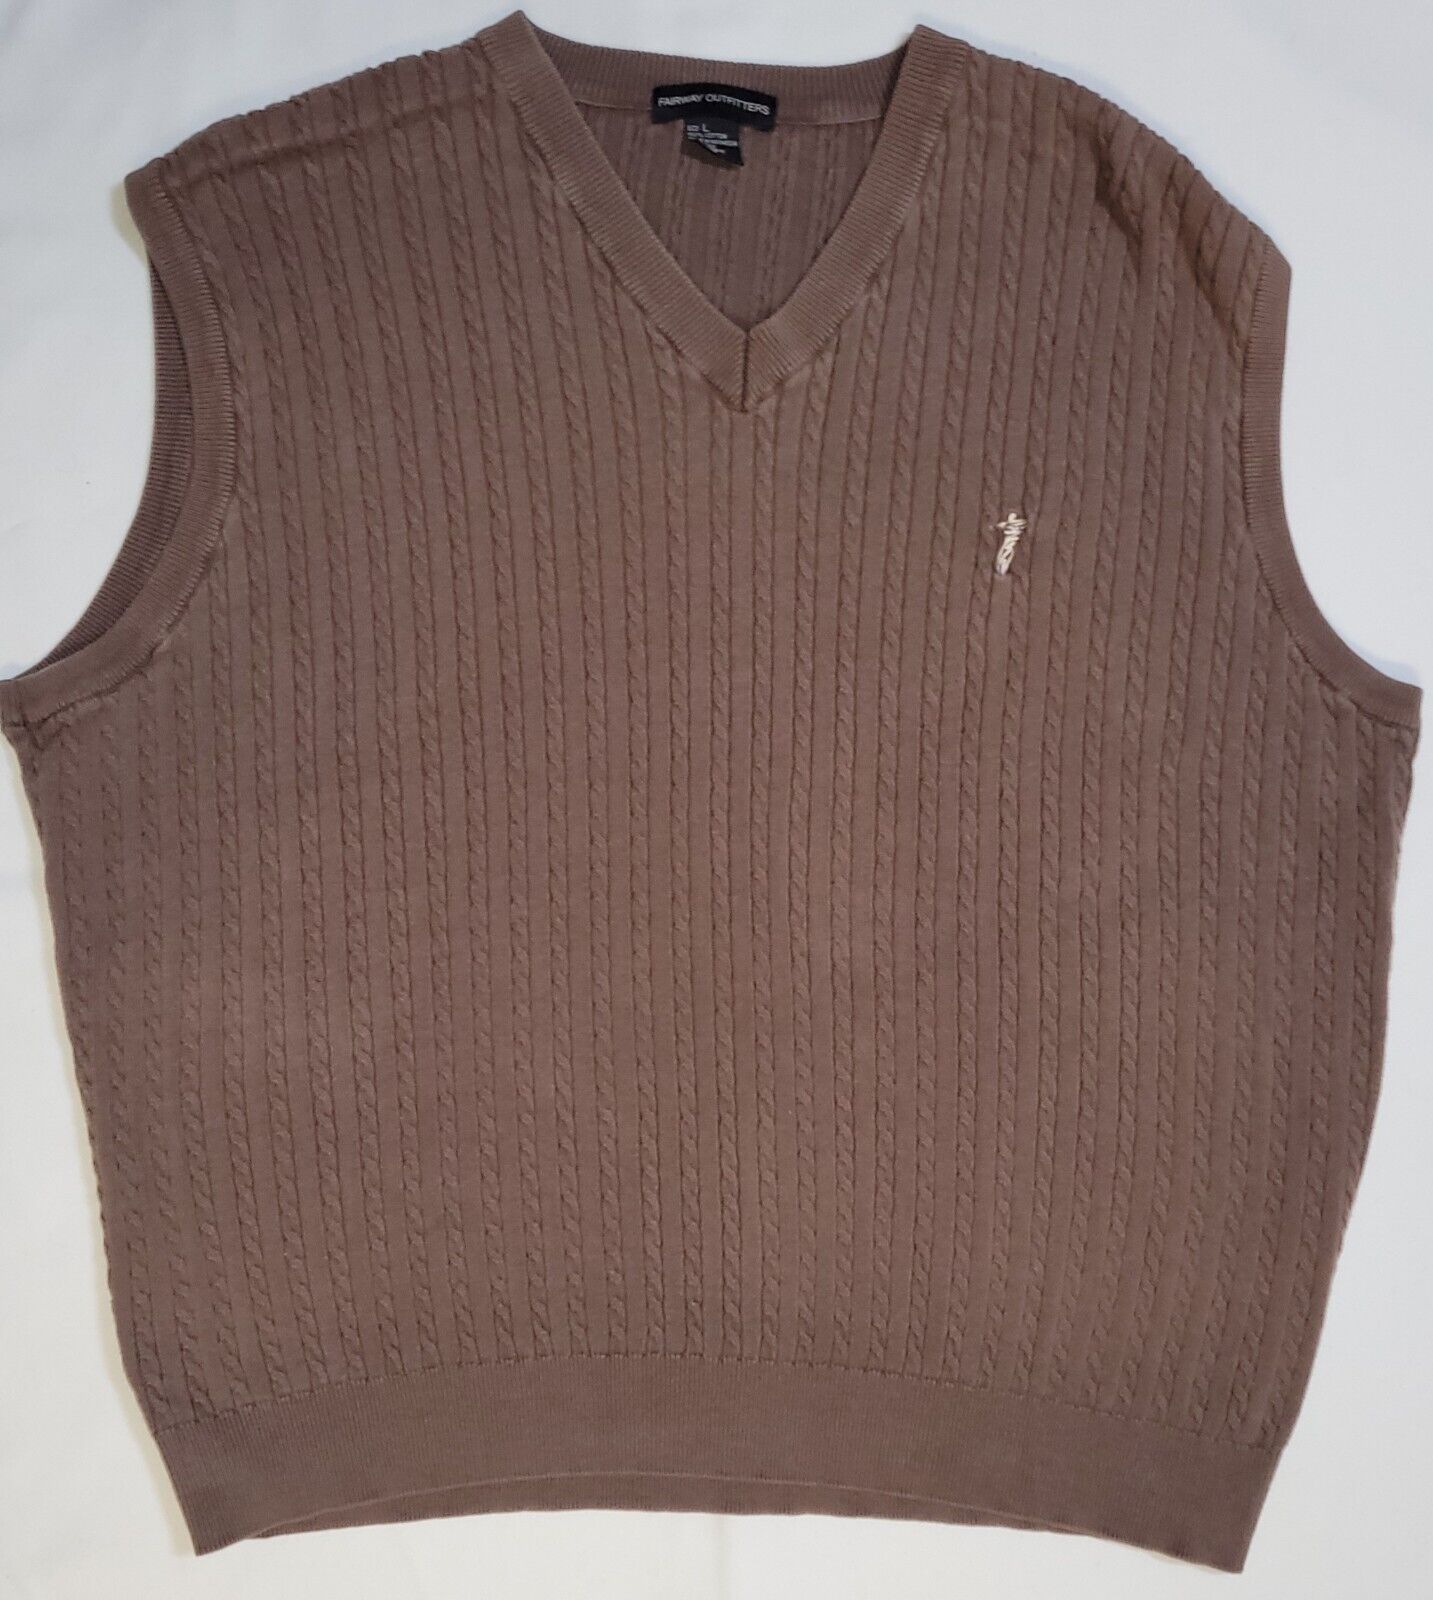 Mens Large Fairway Outfitters 100% Cotton Sweater Vest, Mini Cable Knit. Brown